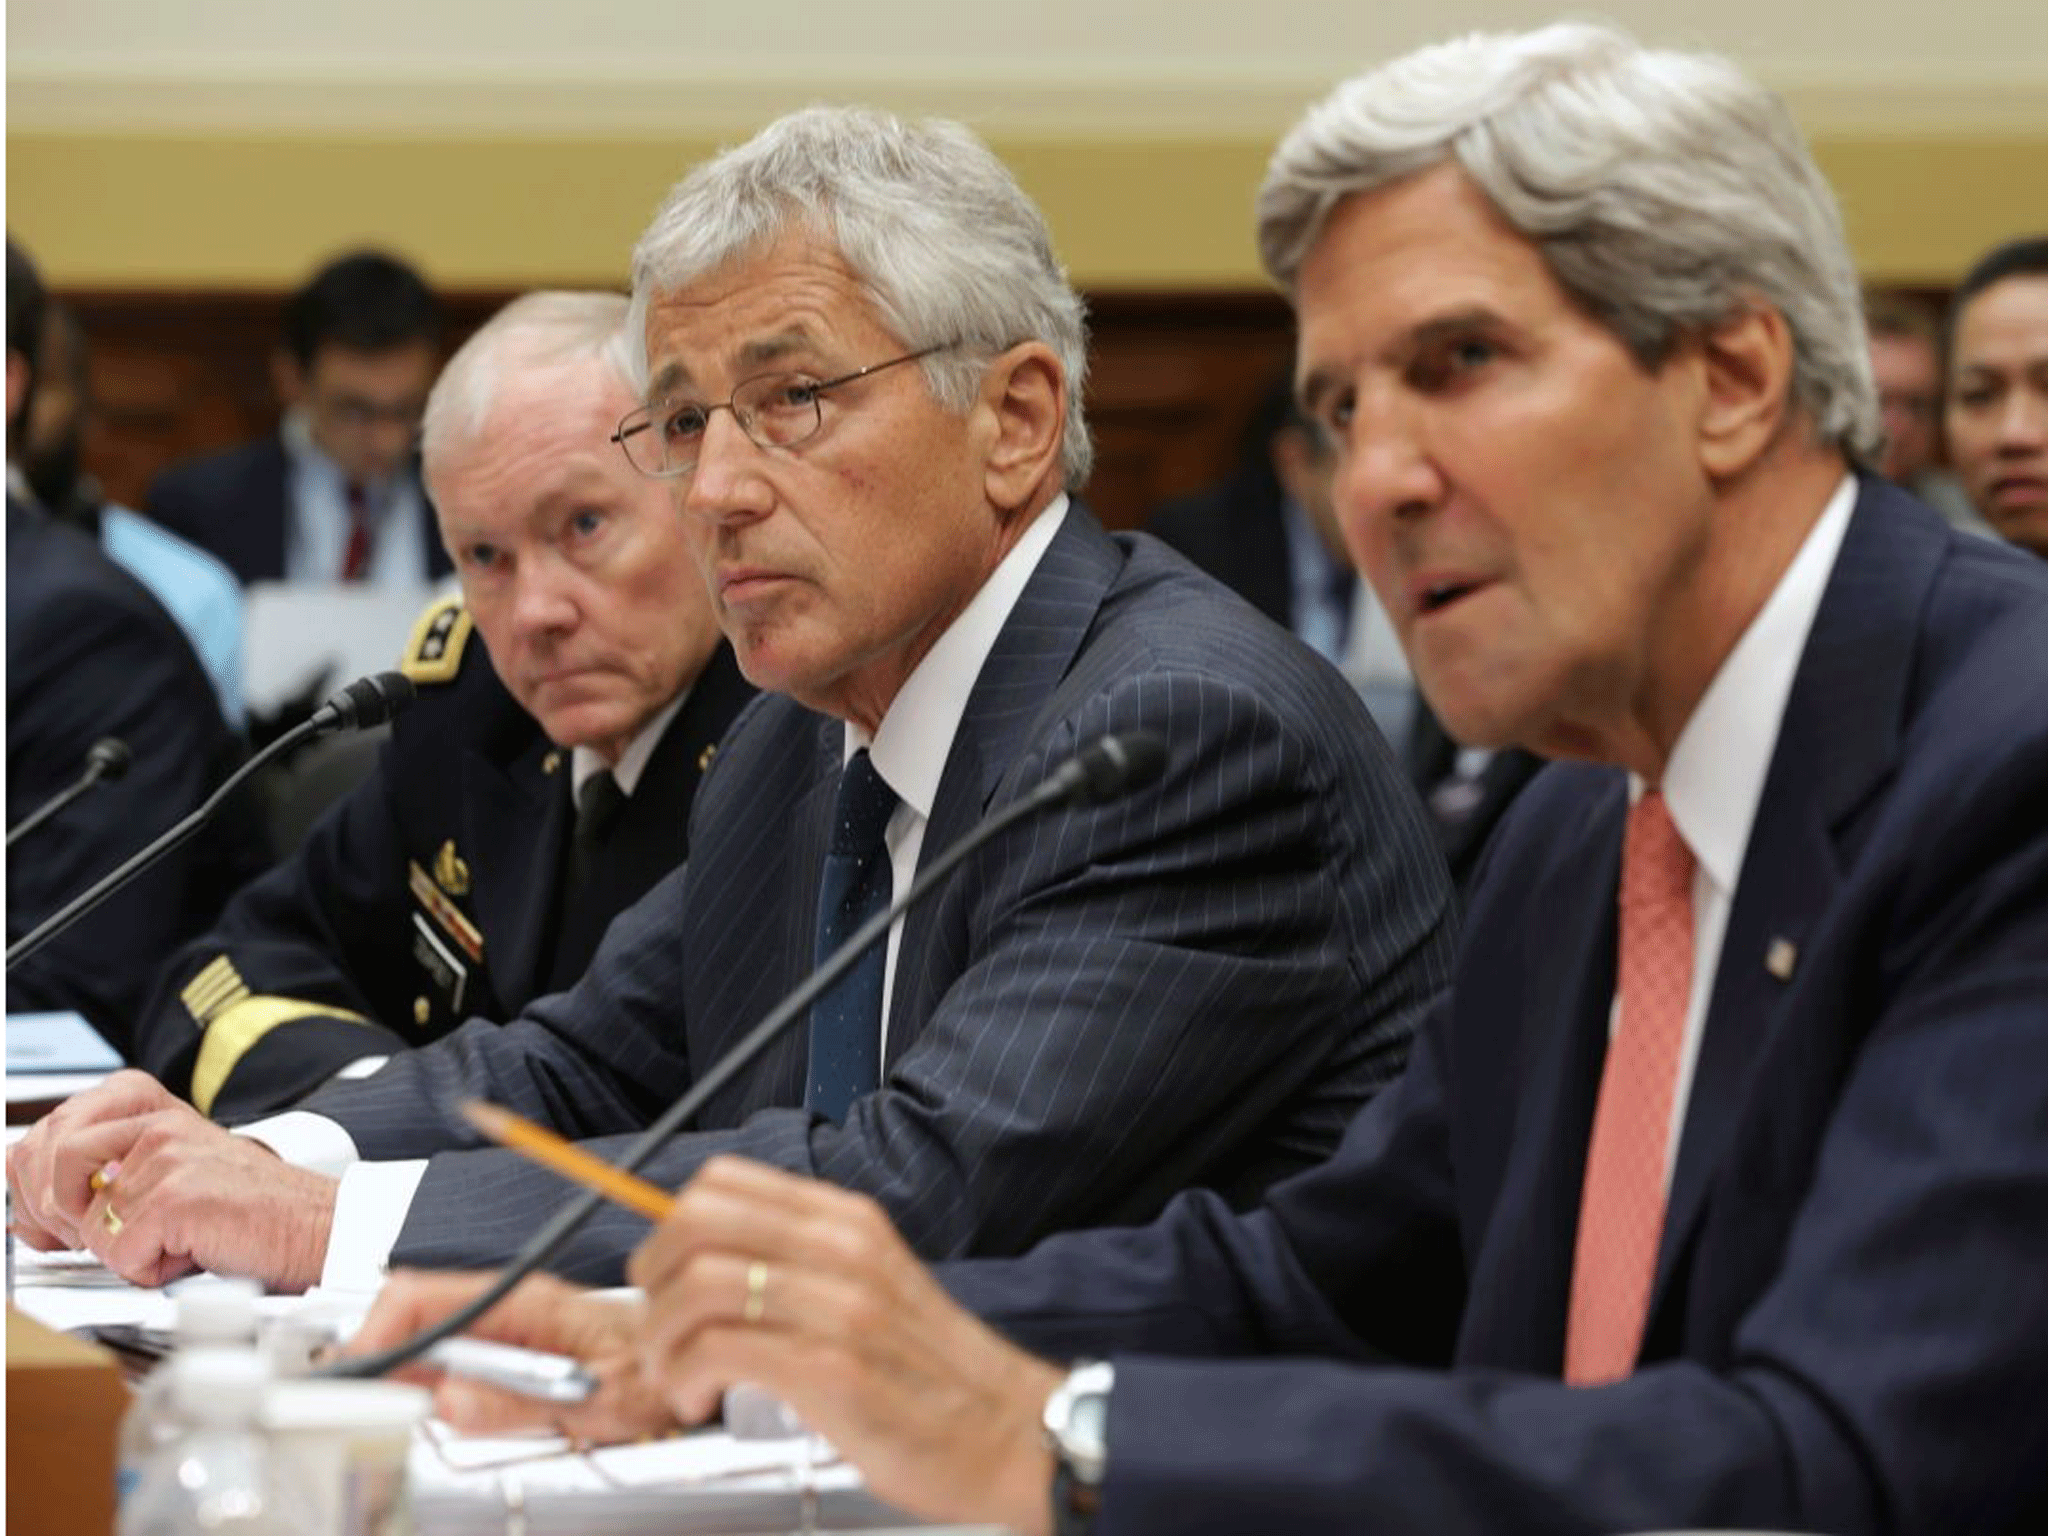 Senior members of the Obama administration face questions from the Senate Foreign Relations Committee on Wednesday. (L-R) Joint Chiefs of Staff Chairman Gen. Martin Dempsey, Defence Secretary Chuck Hagel and Secretary of State John Kerry